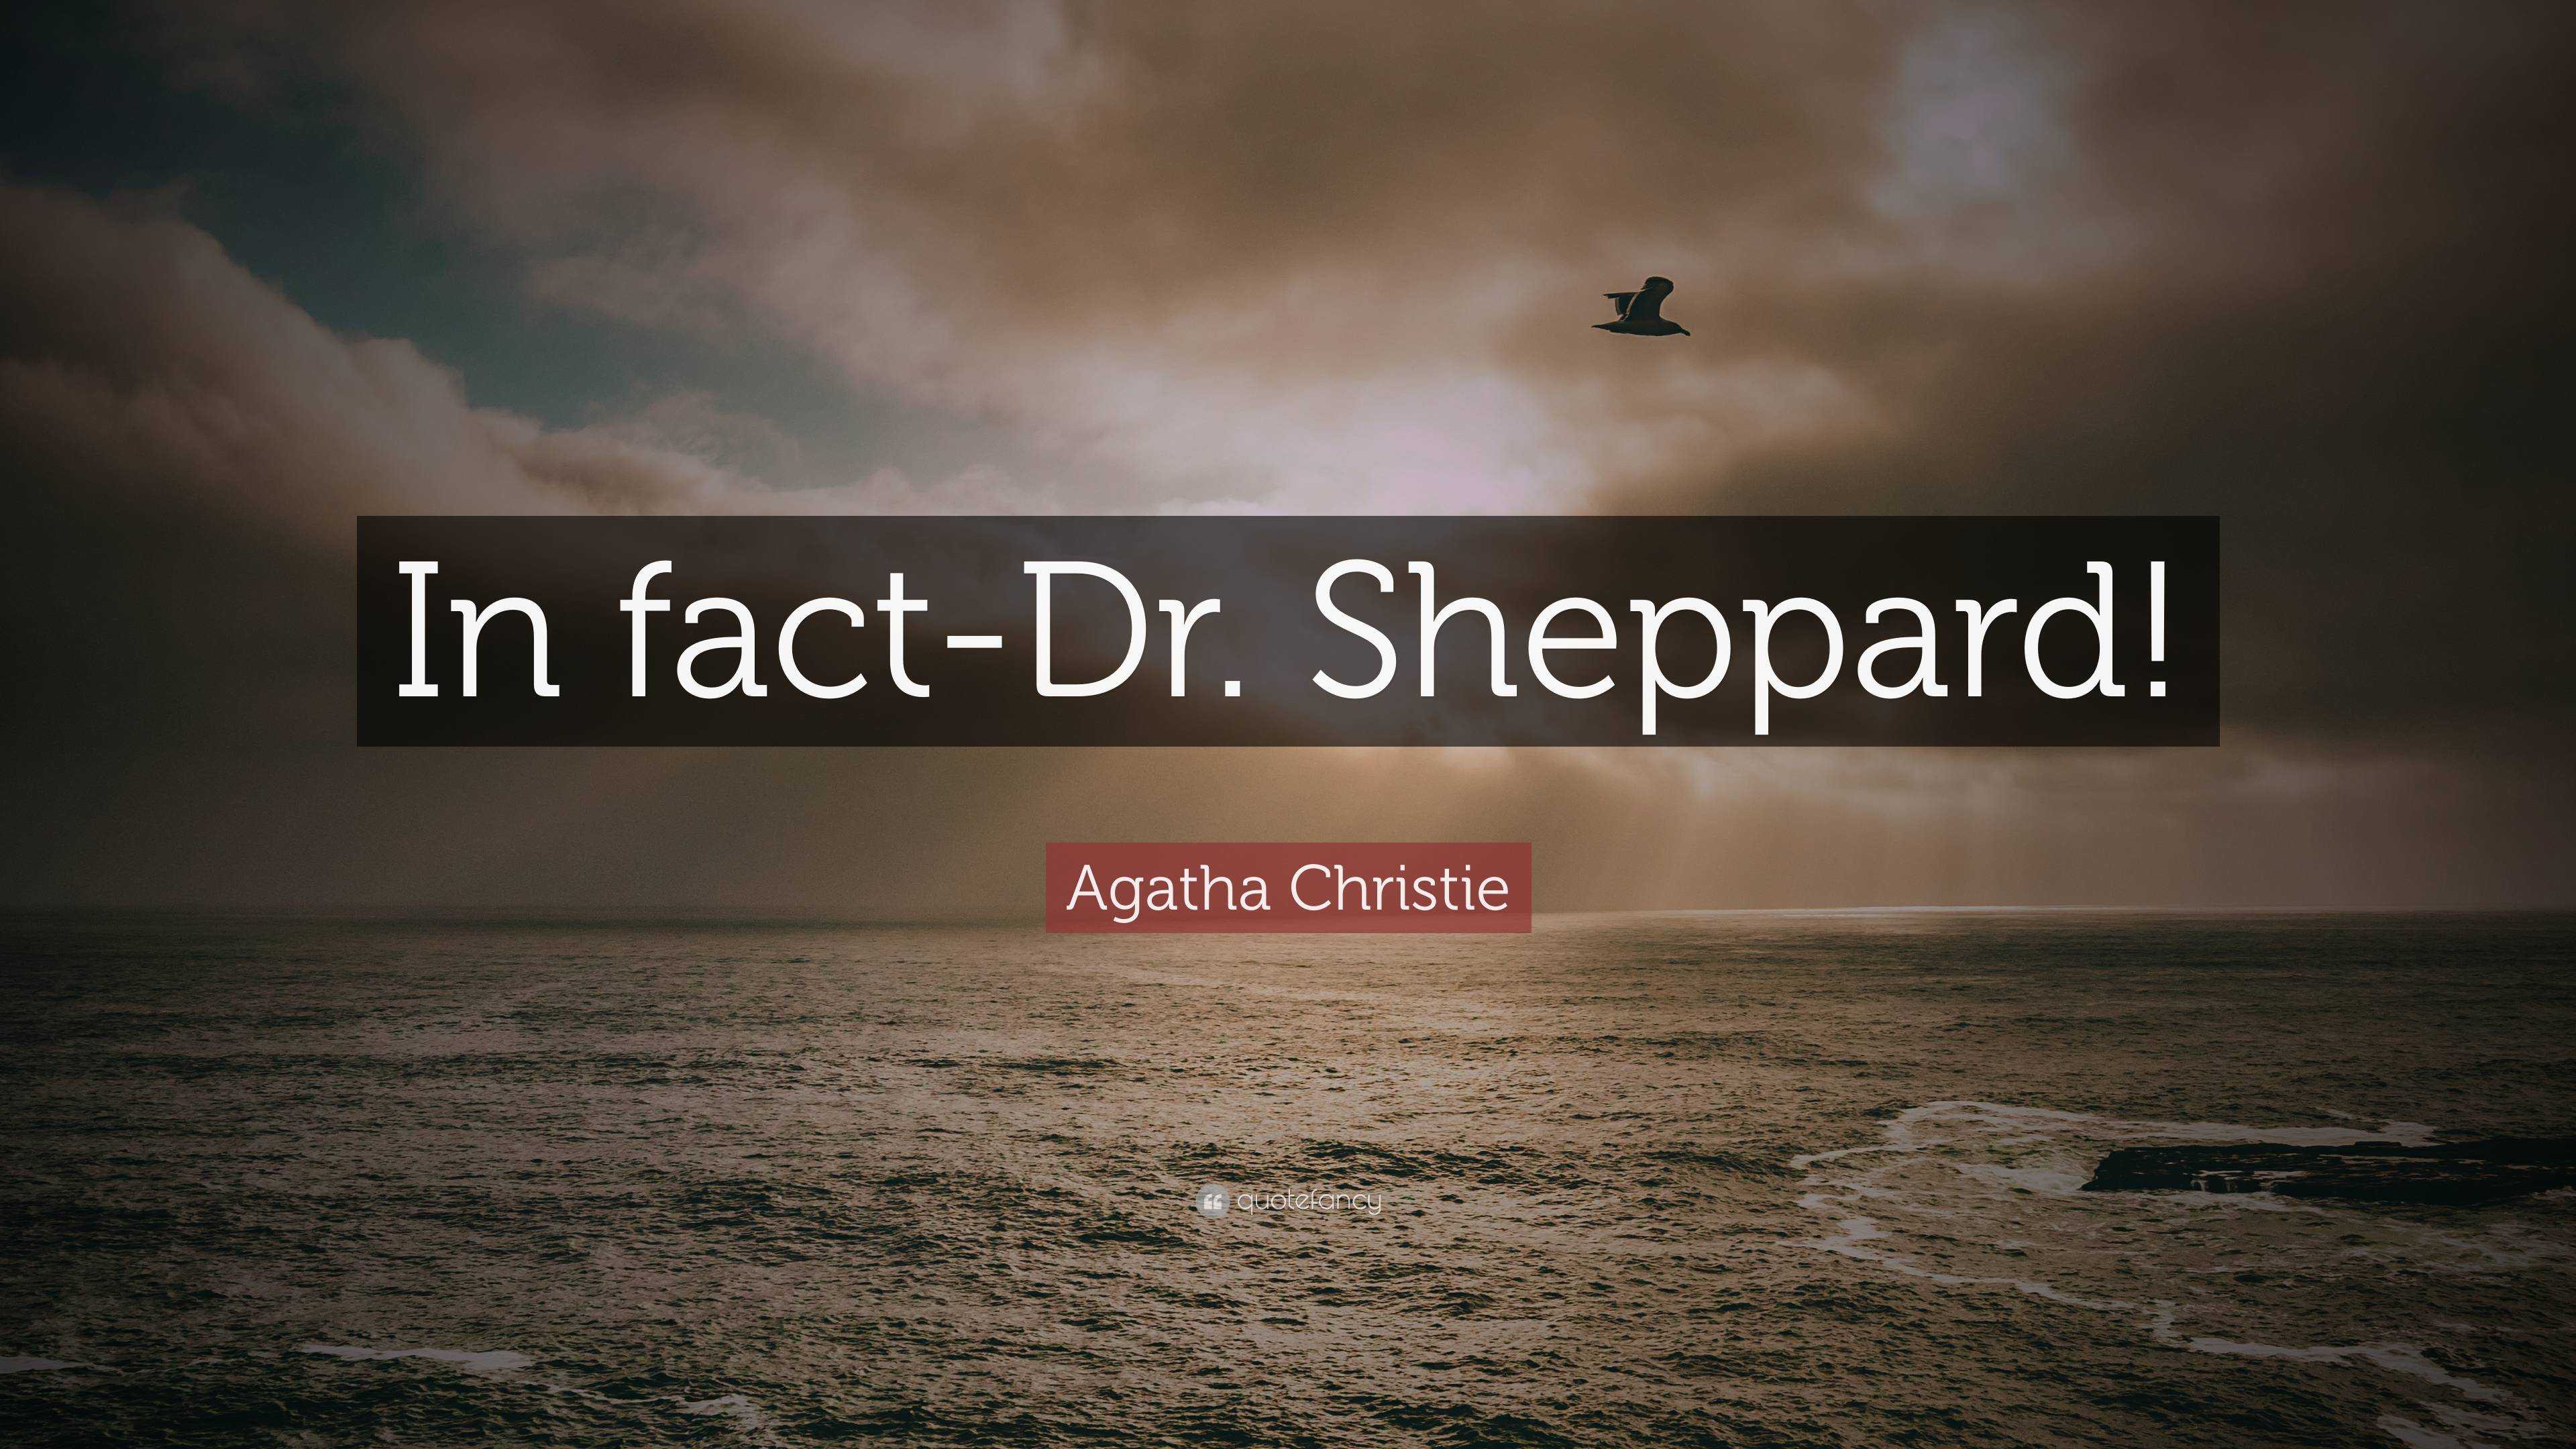 Agatha Christie Quote: “In fact-Dr. Sheppard!”